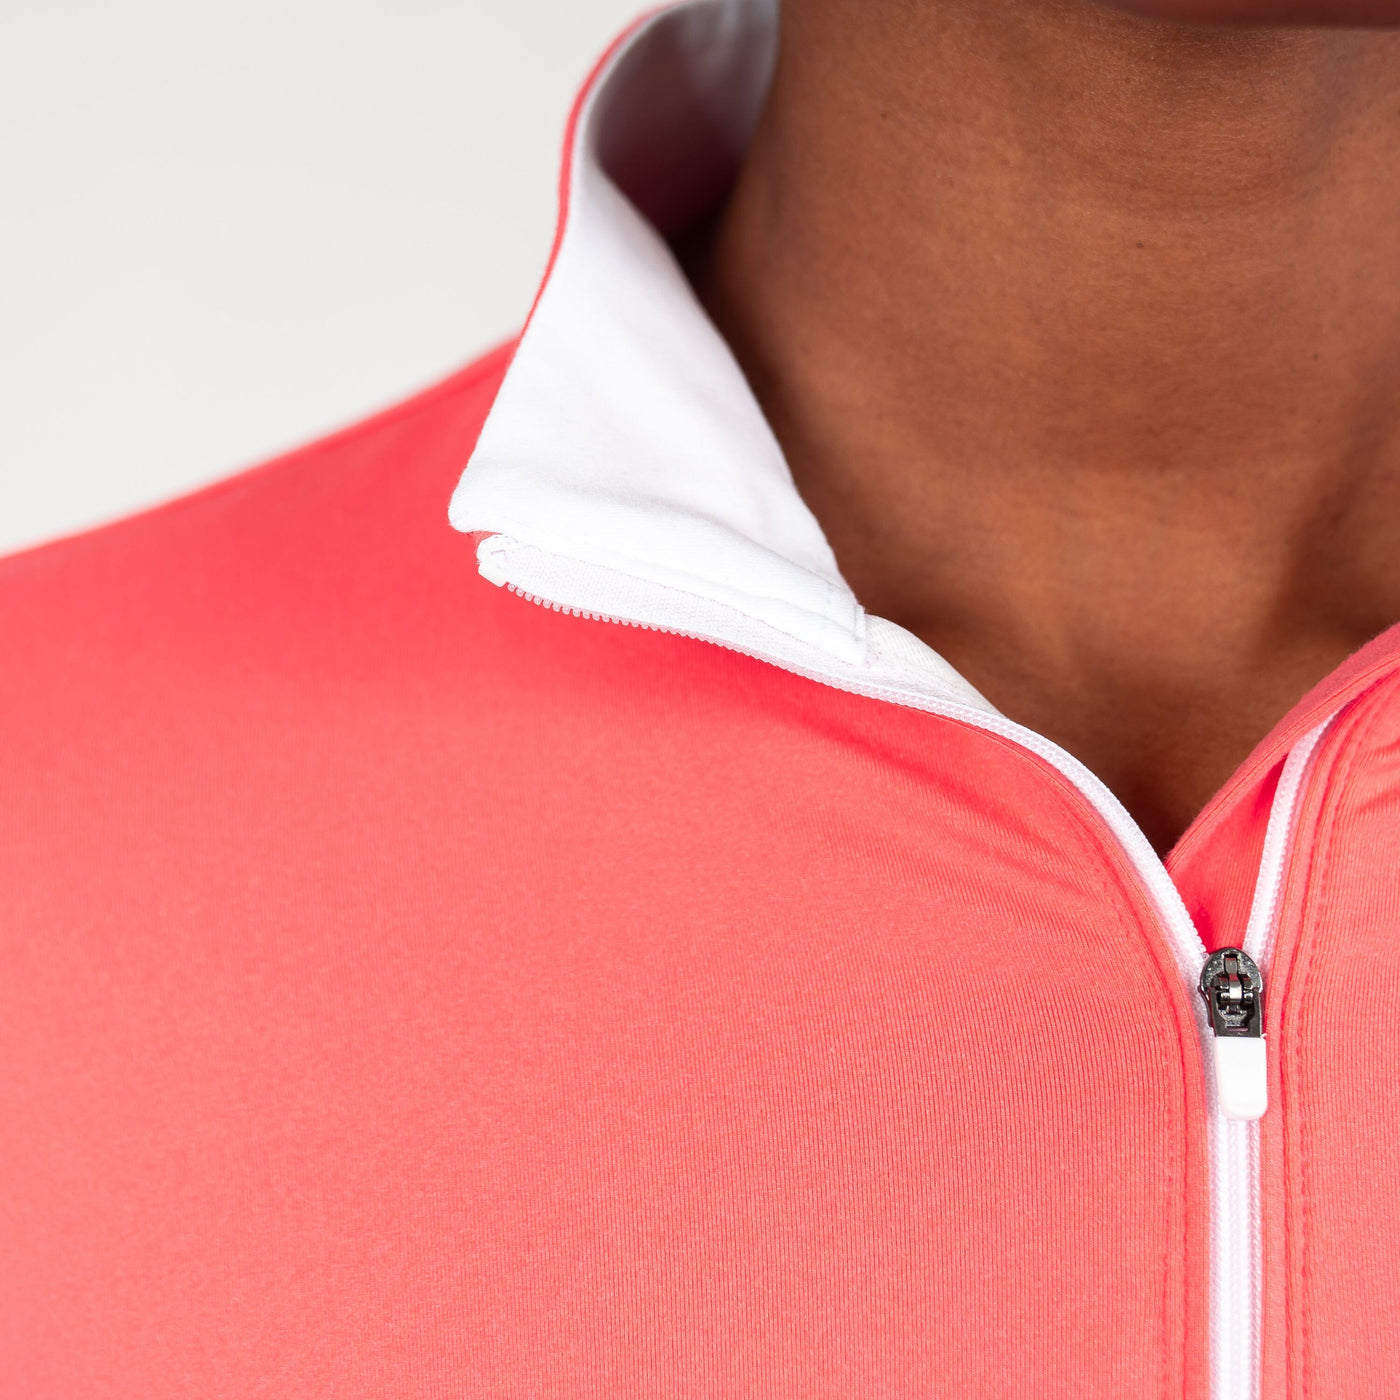 The Solid Performance Q-Zip | Solid - Watermelon